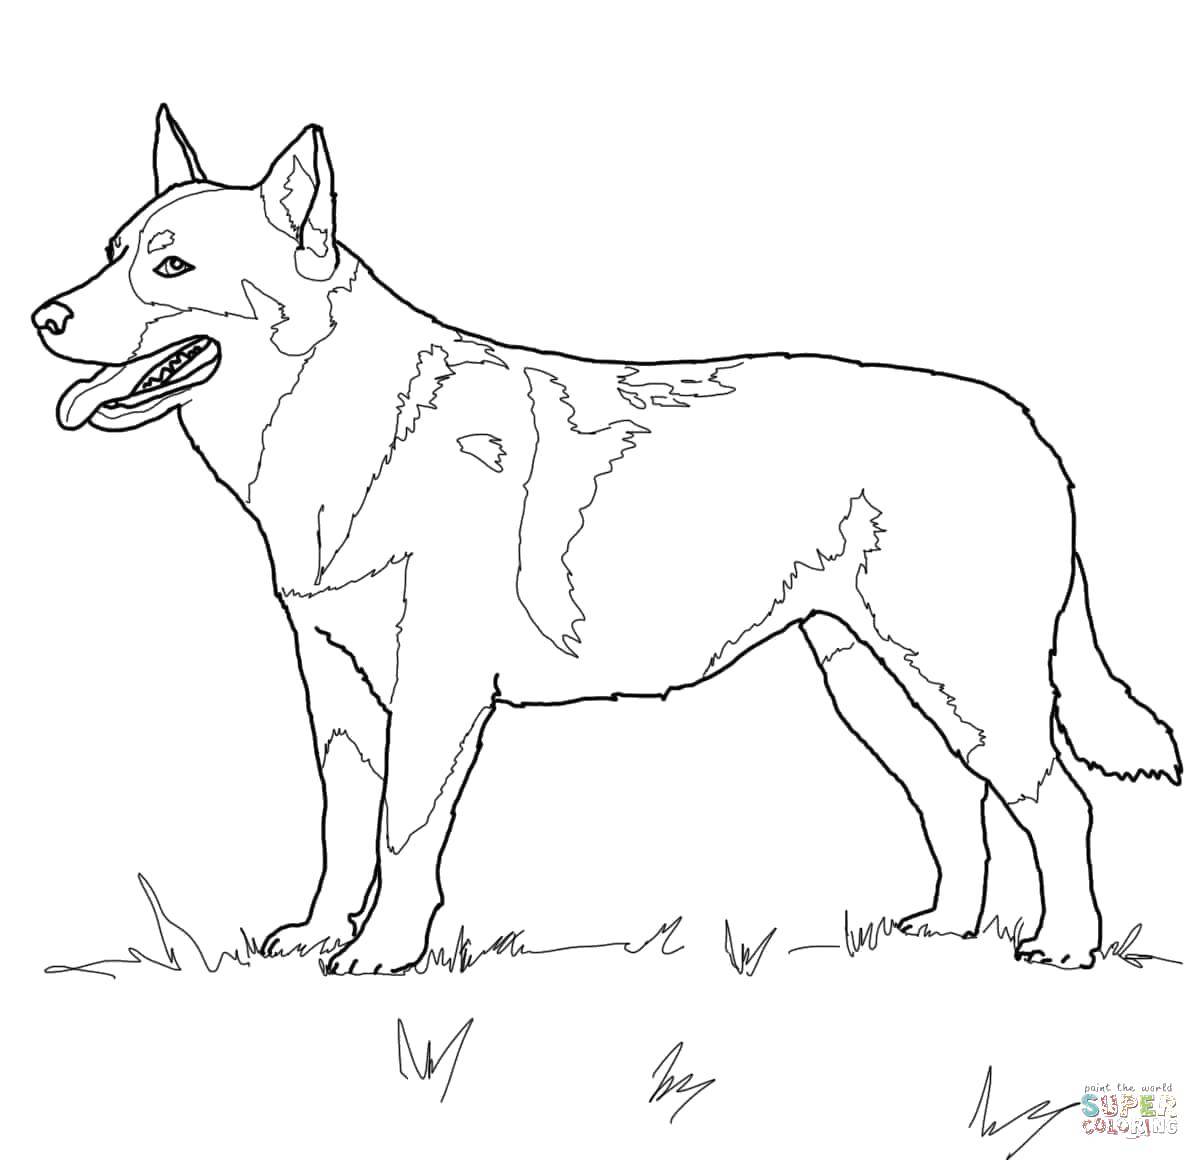 Coloring The speckled dog. Category Animals. Tags:  Animals, dog.